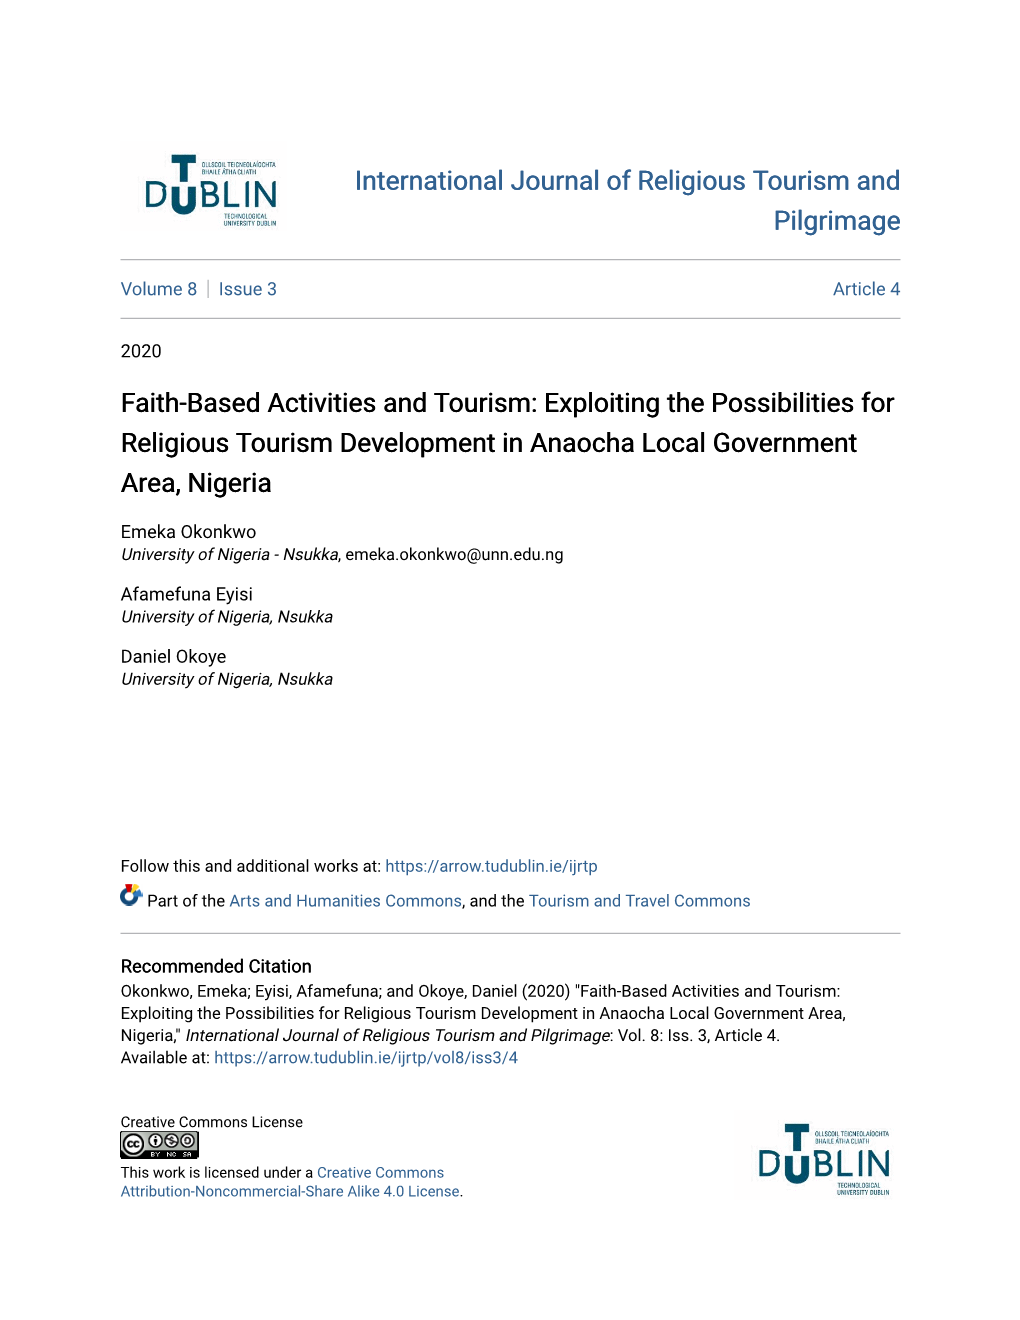 Exploiting the Possibilities for Religious Tourism Development in Anaocha Local Government Area, Nigeria